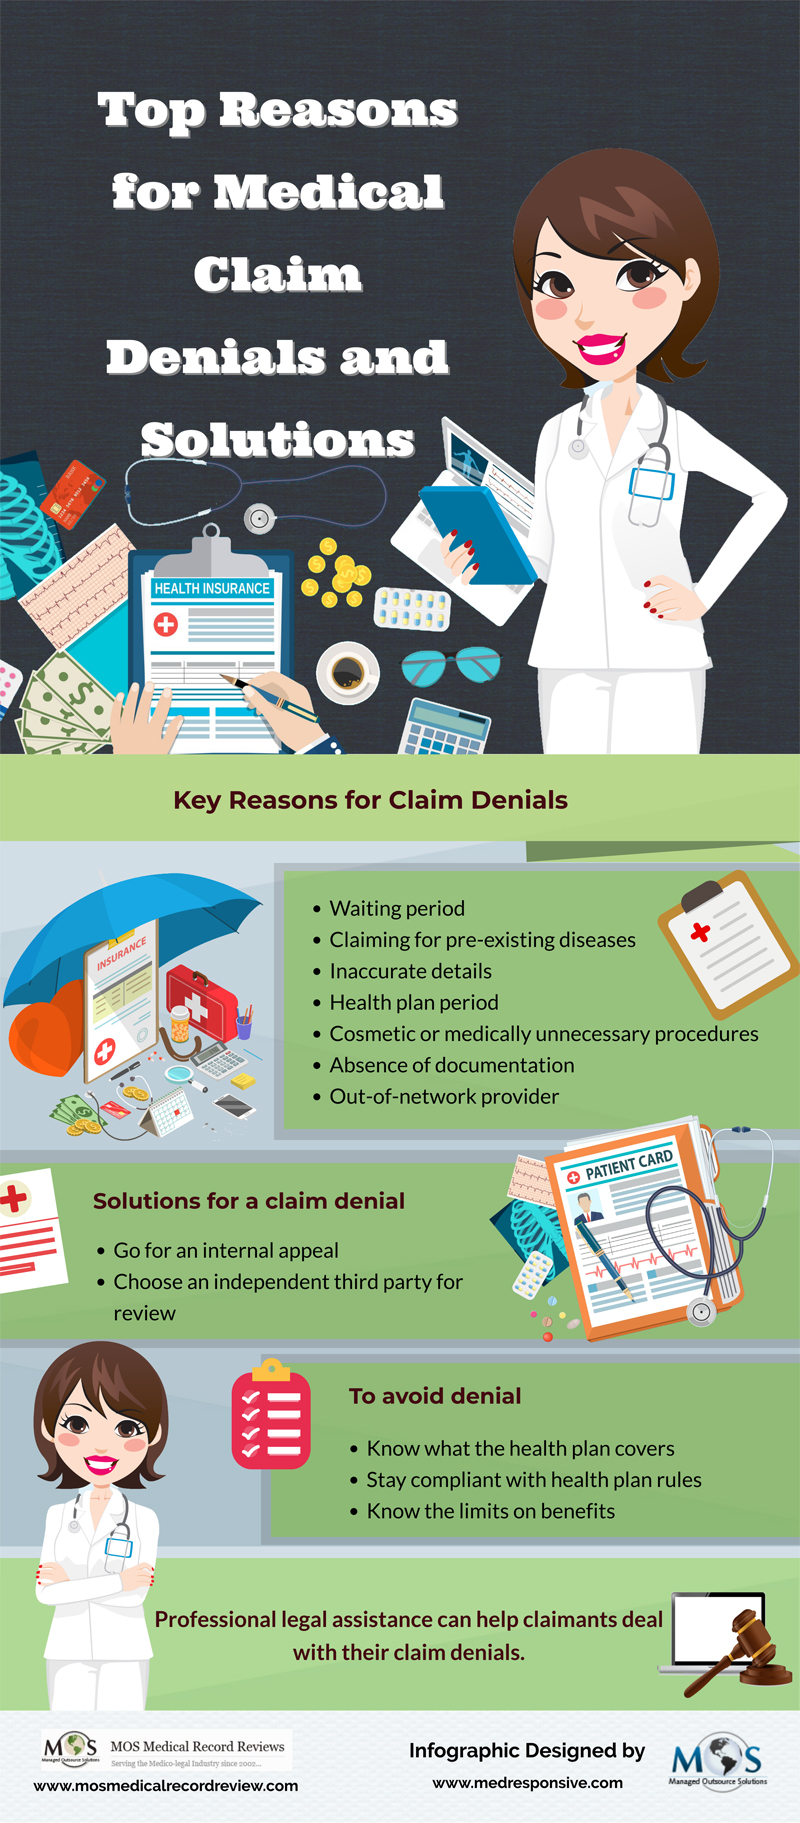 Medical Claim Denials and Solutions